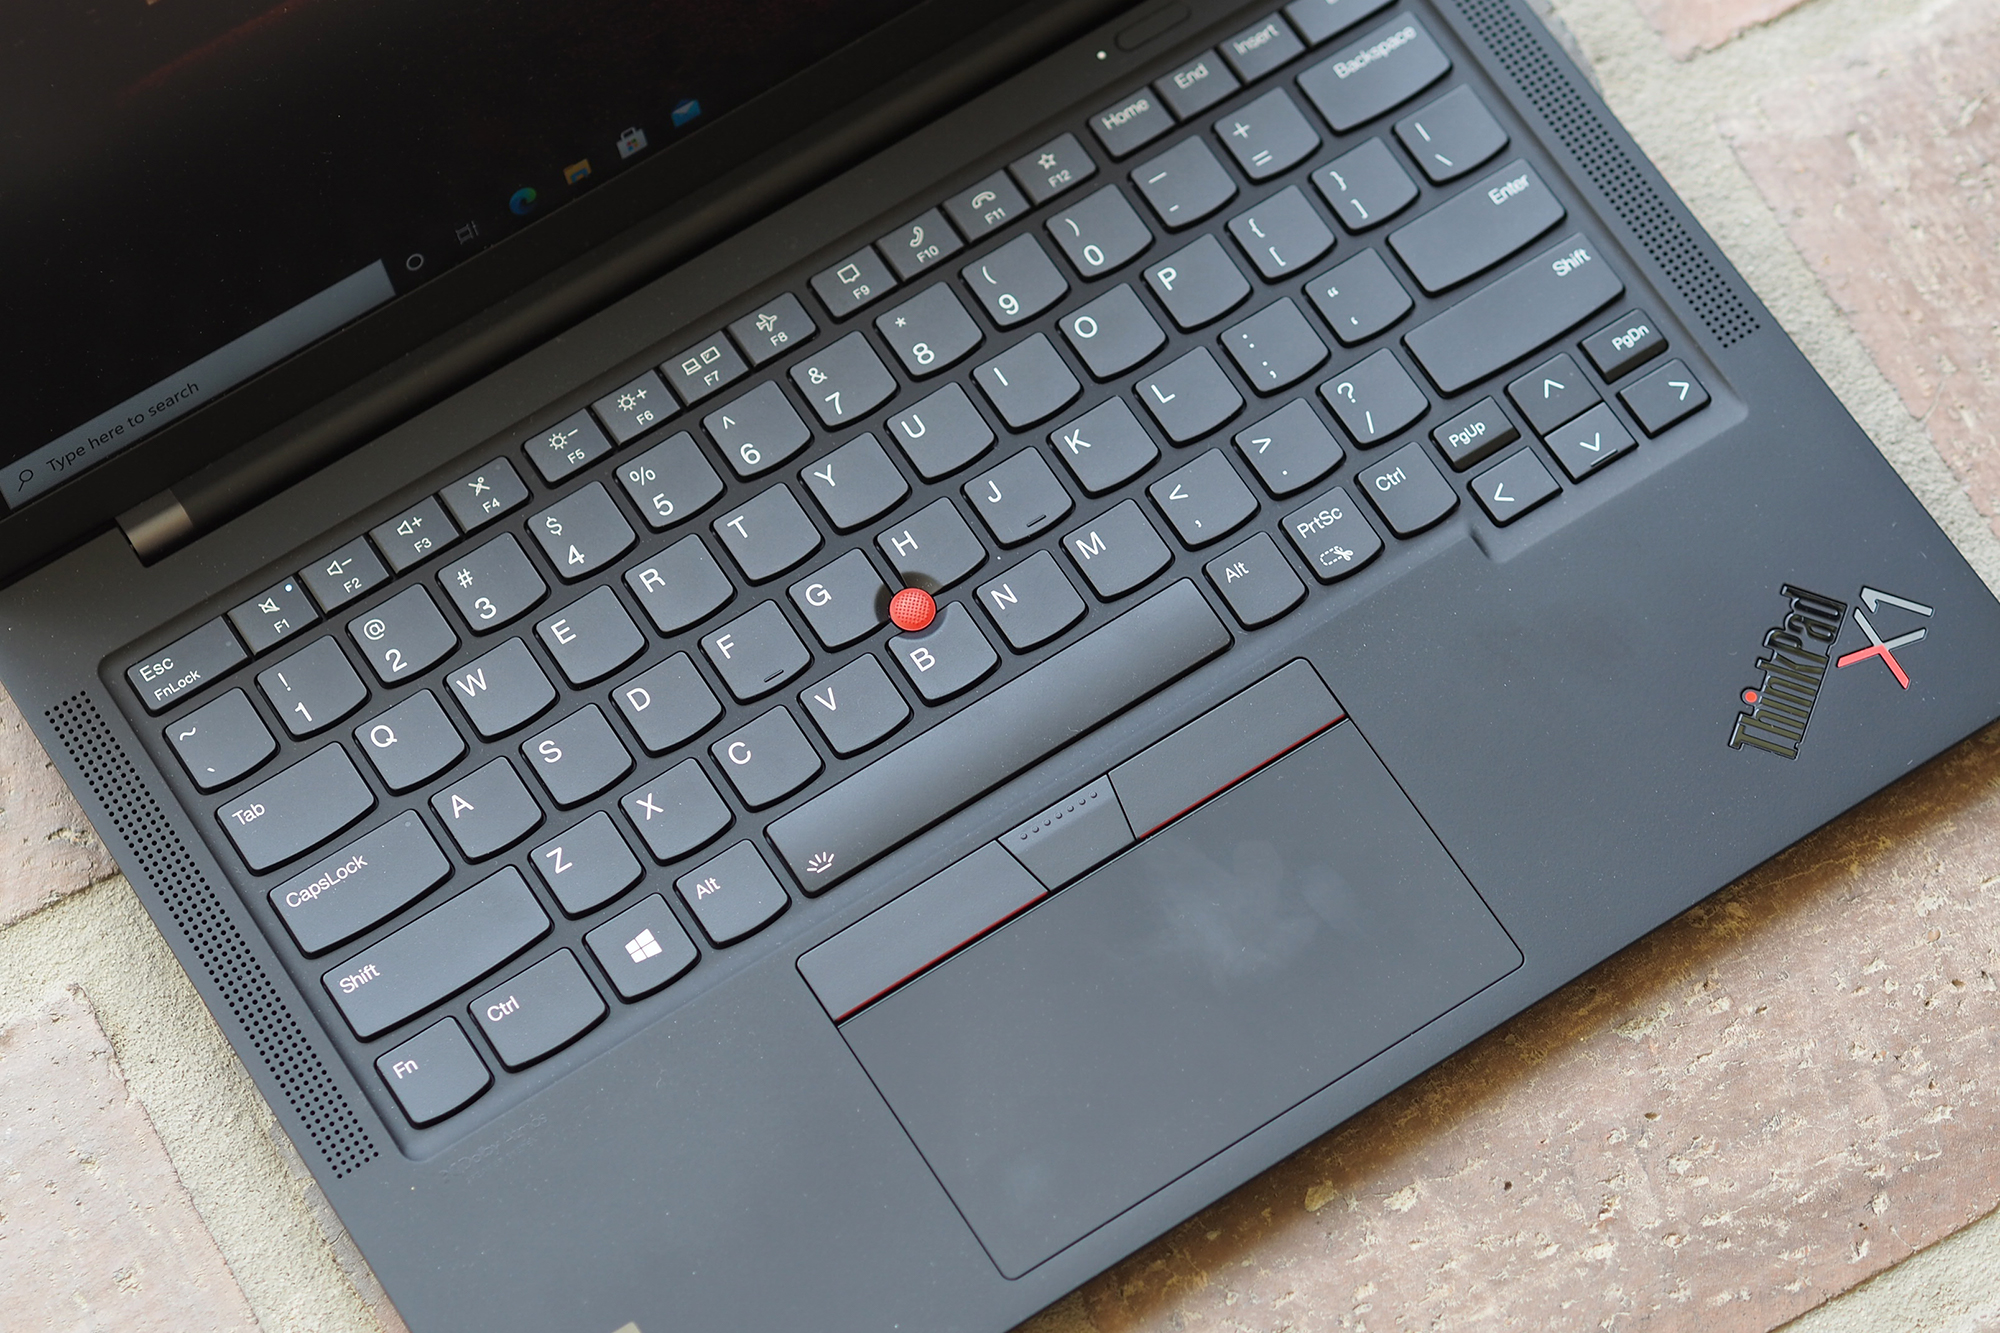 Keyboard and trackpad on the Lenovo ThinkPad X1 Carbon Gen 9.